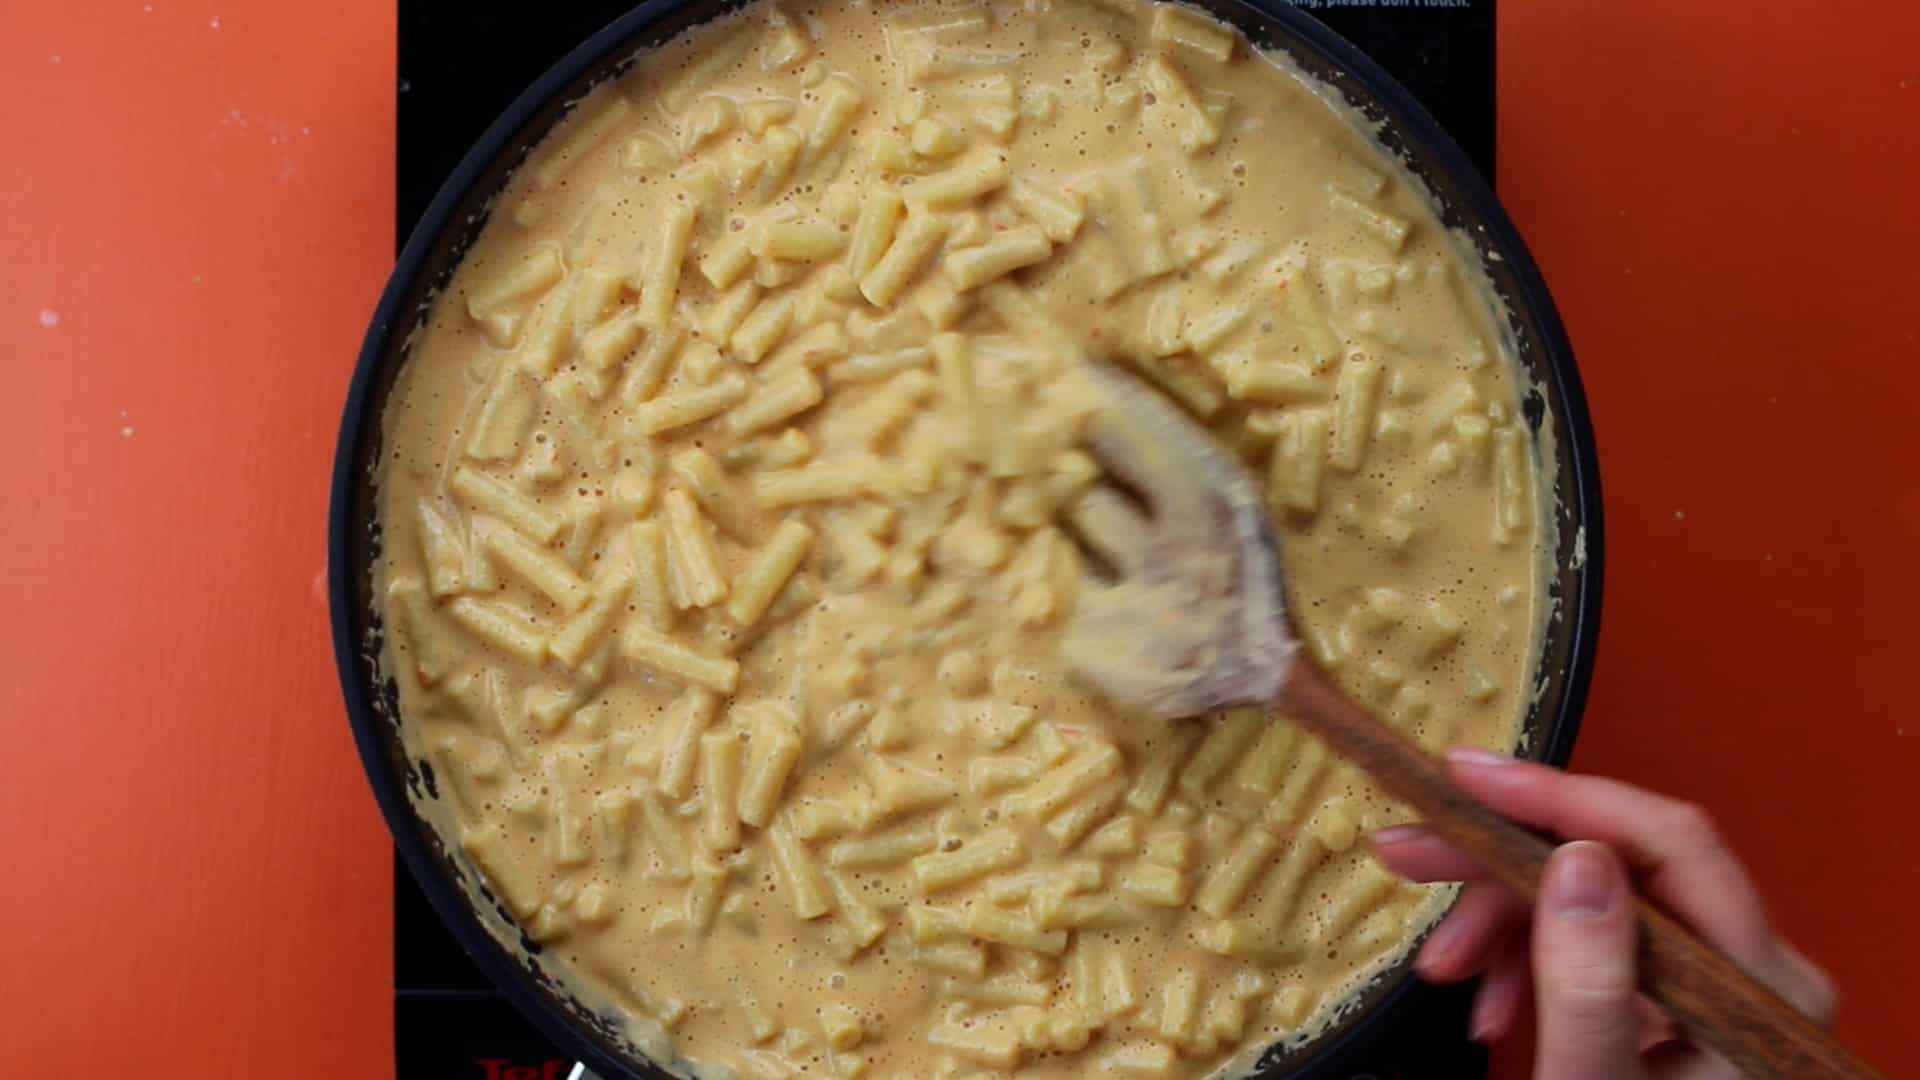 Macaroni pasta ready in pan and being stirred with wooden spoon